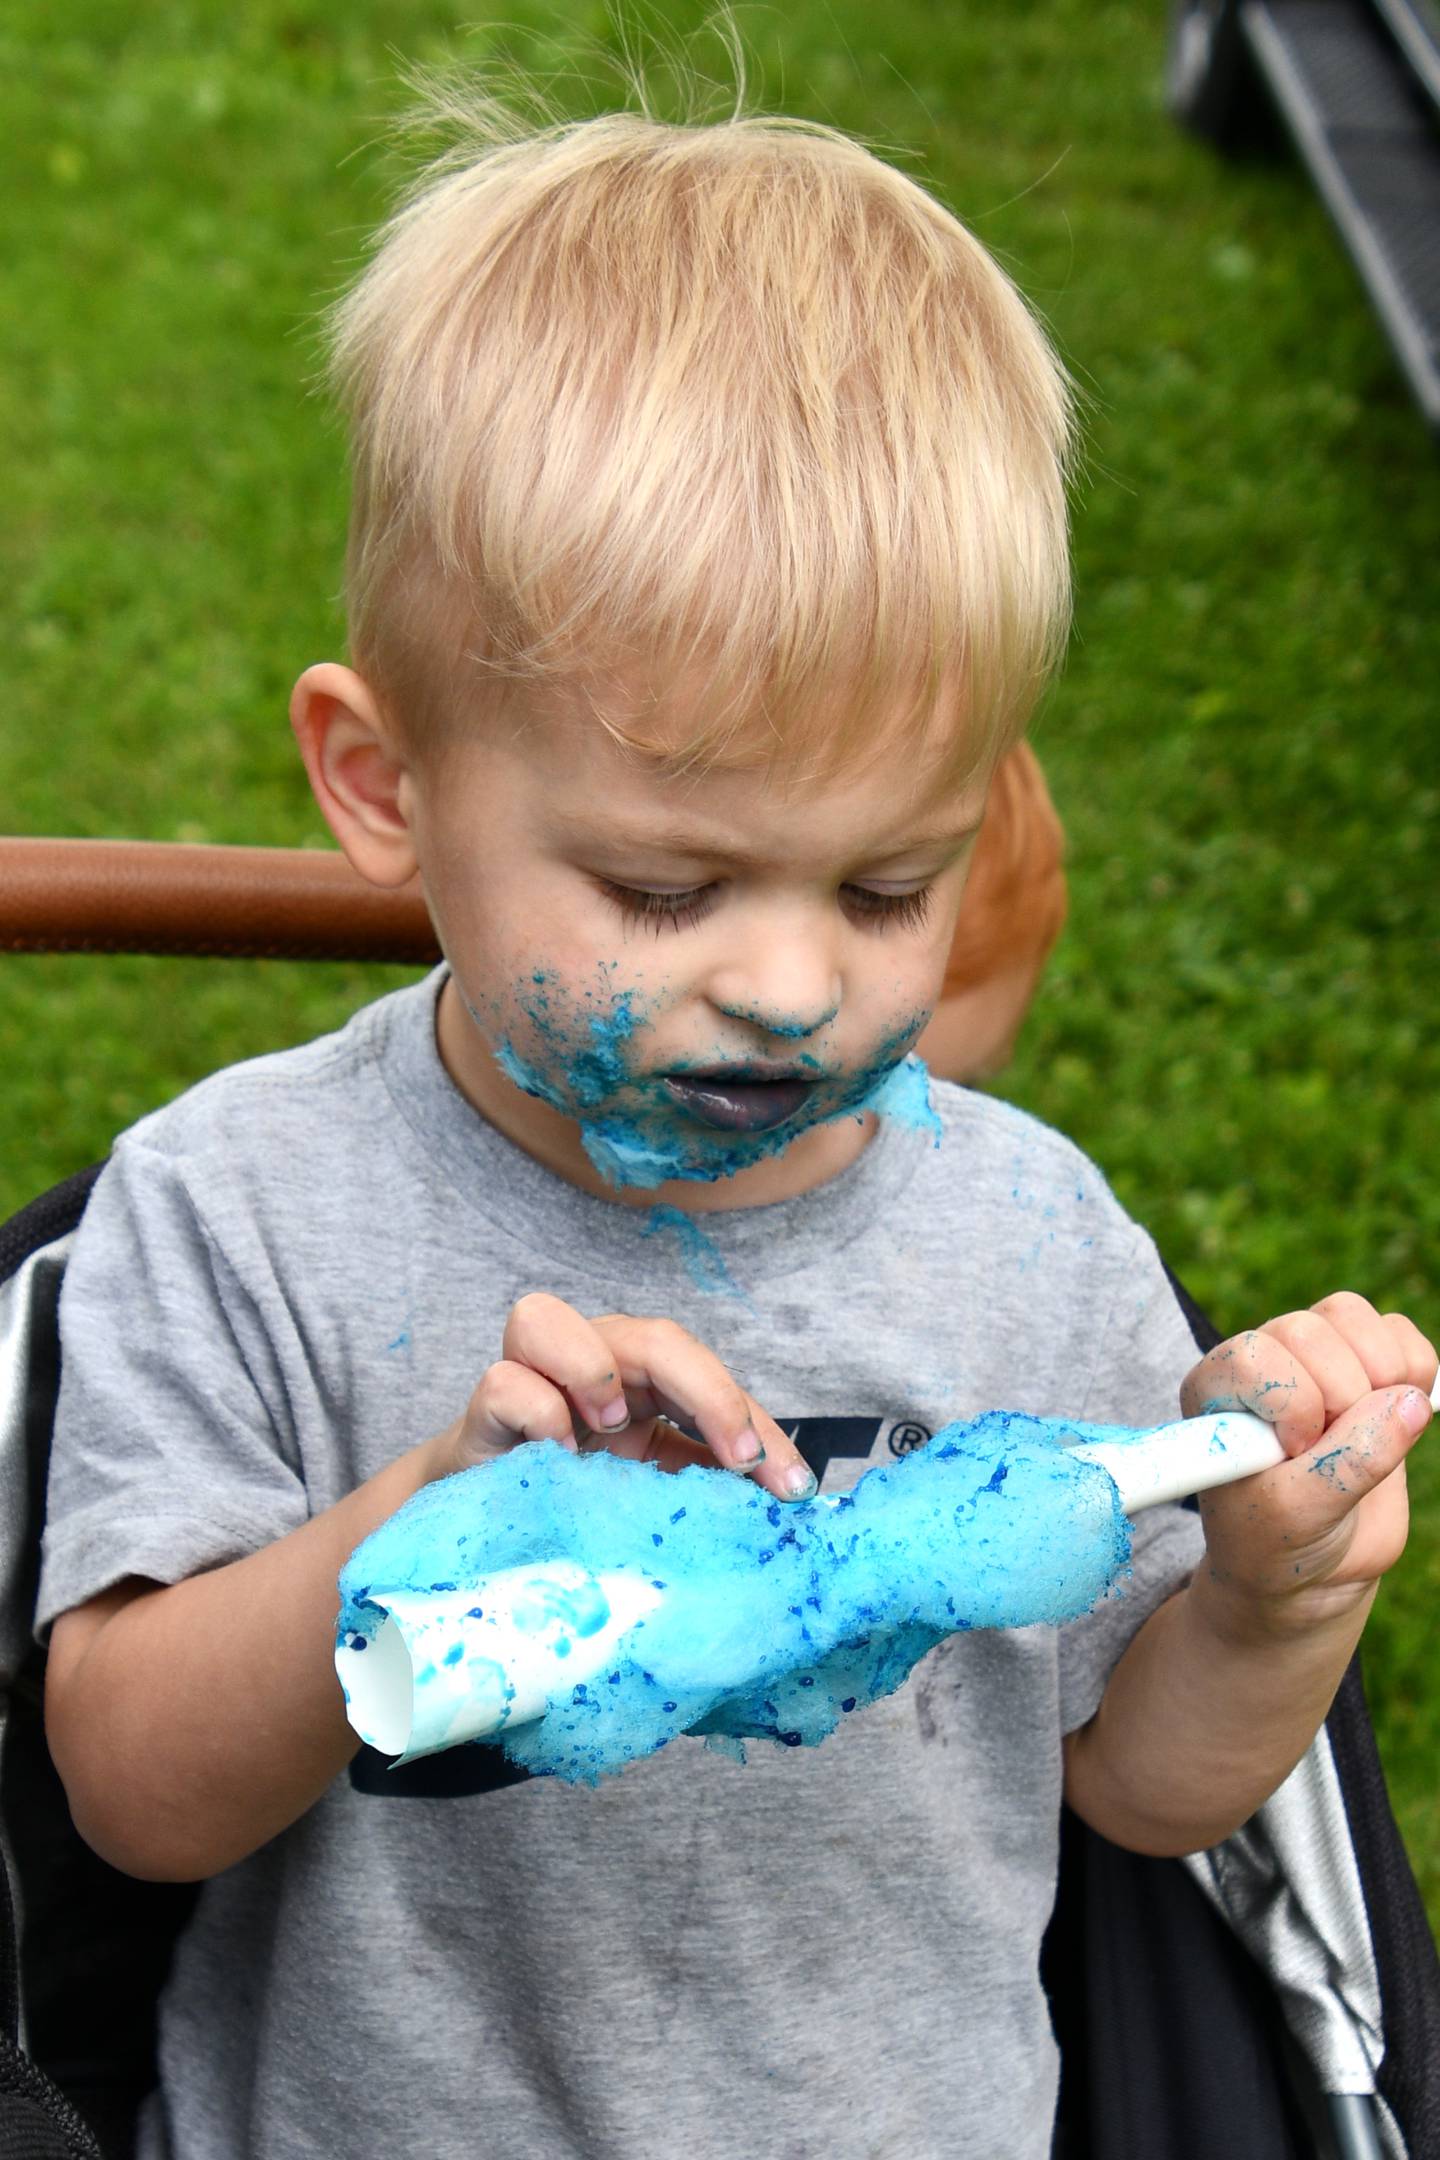 Greyson Hodges didn't seem to mind the mess of the cotton candy Saturday, June 11, 2022, during the Spring Valley Summer Fest at Kirby Park.